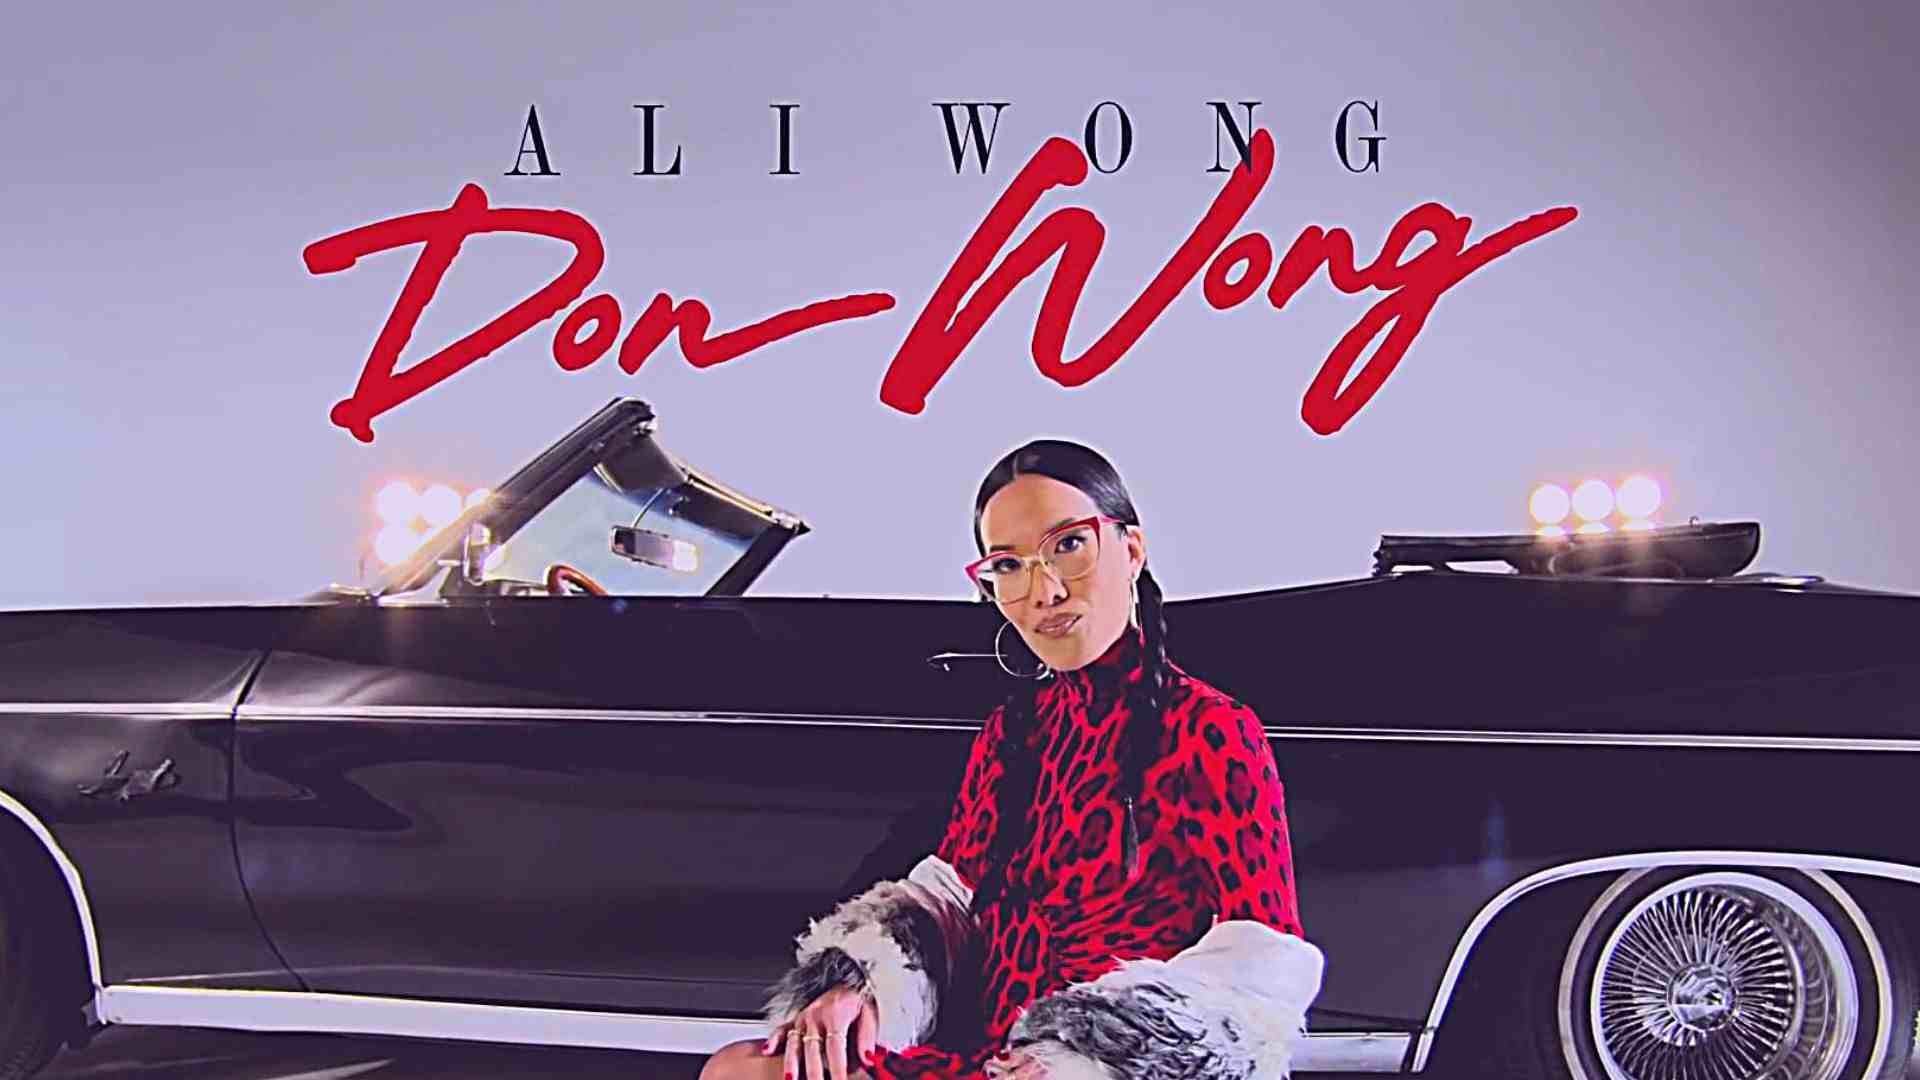 Ali Wong: Don Wong Parents guide And Age Rating | 2022